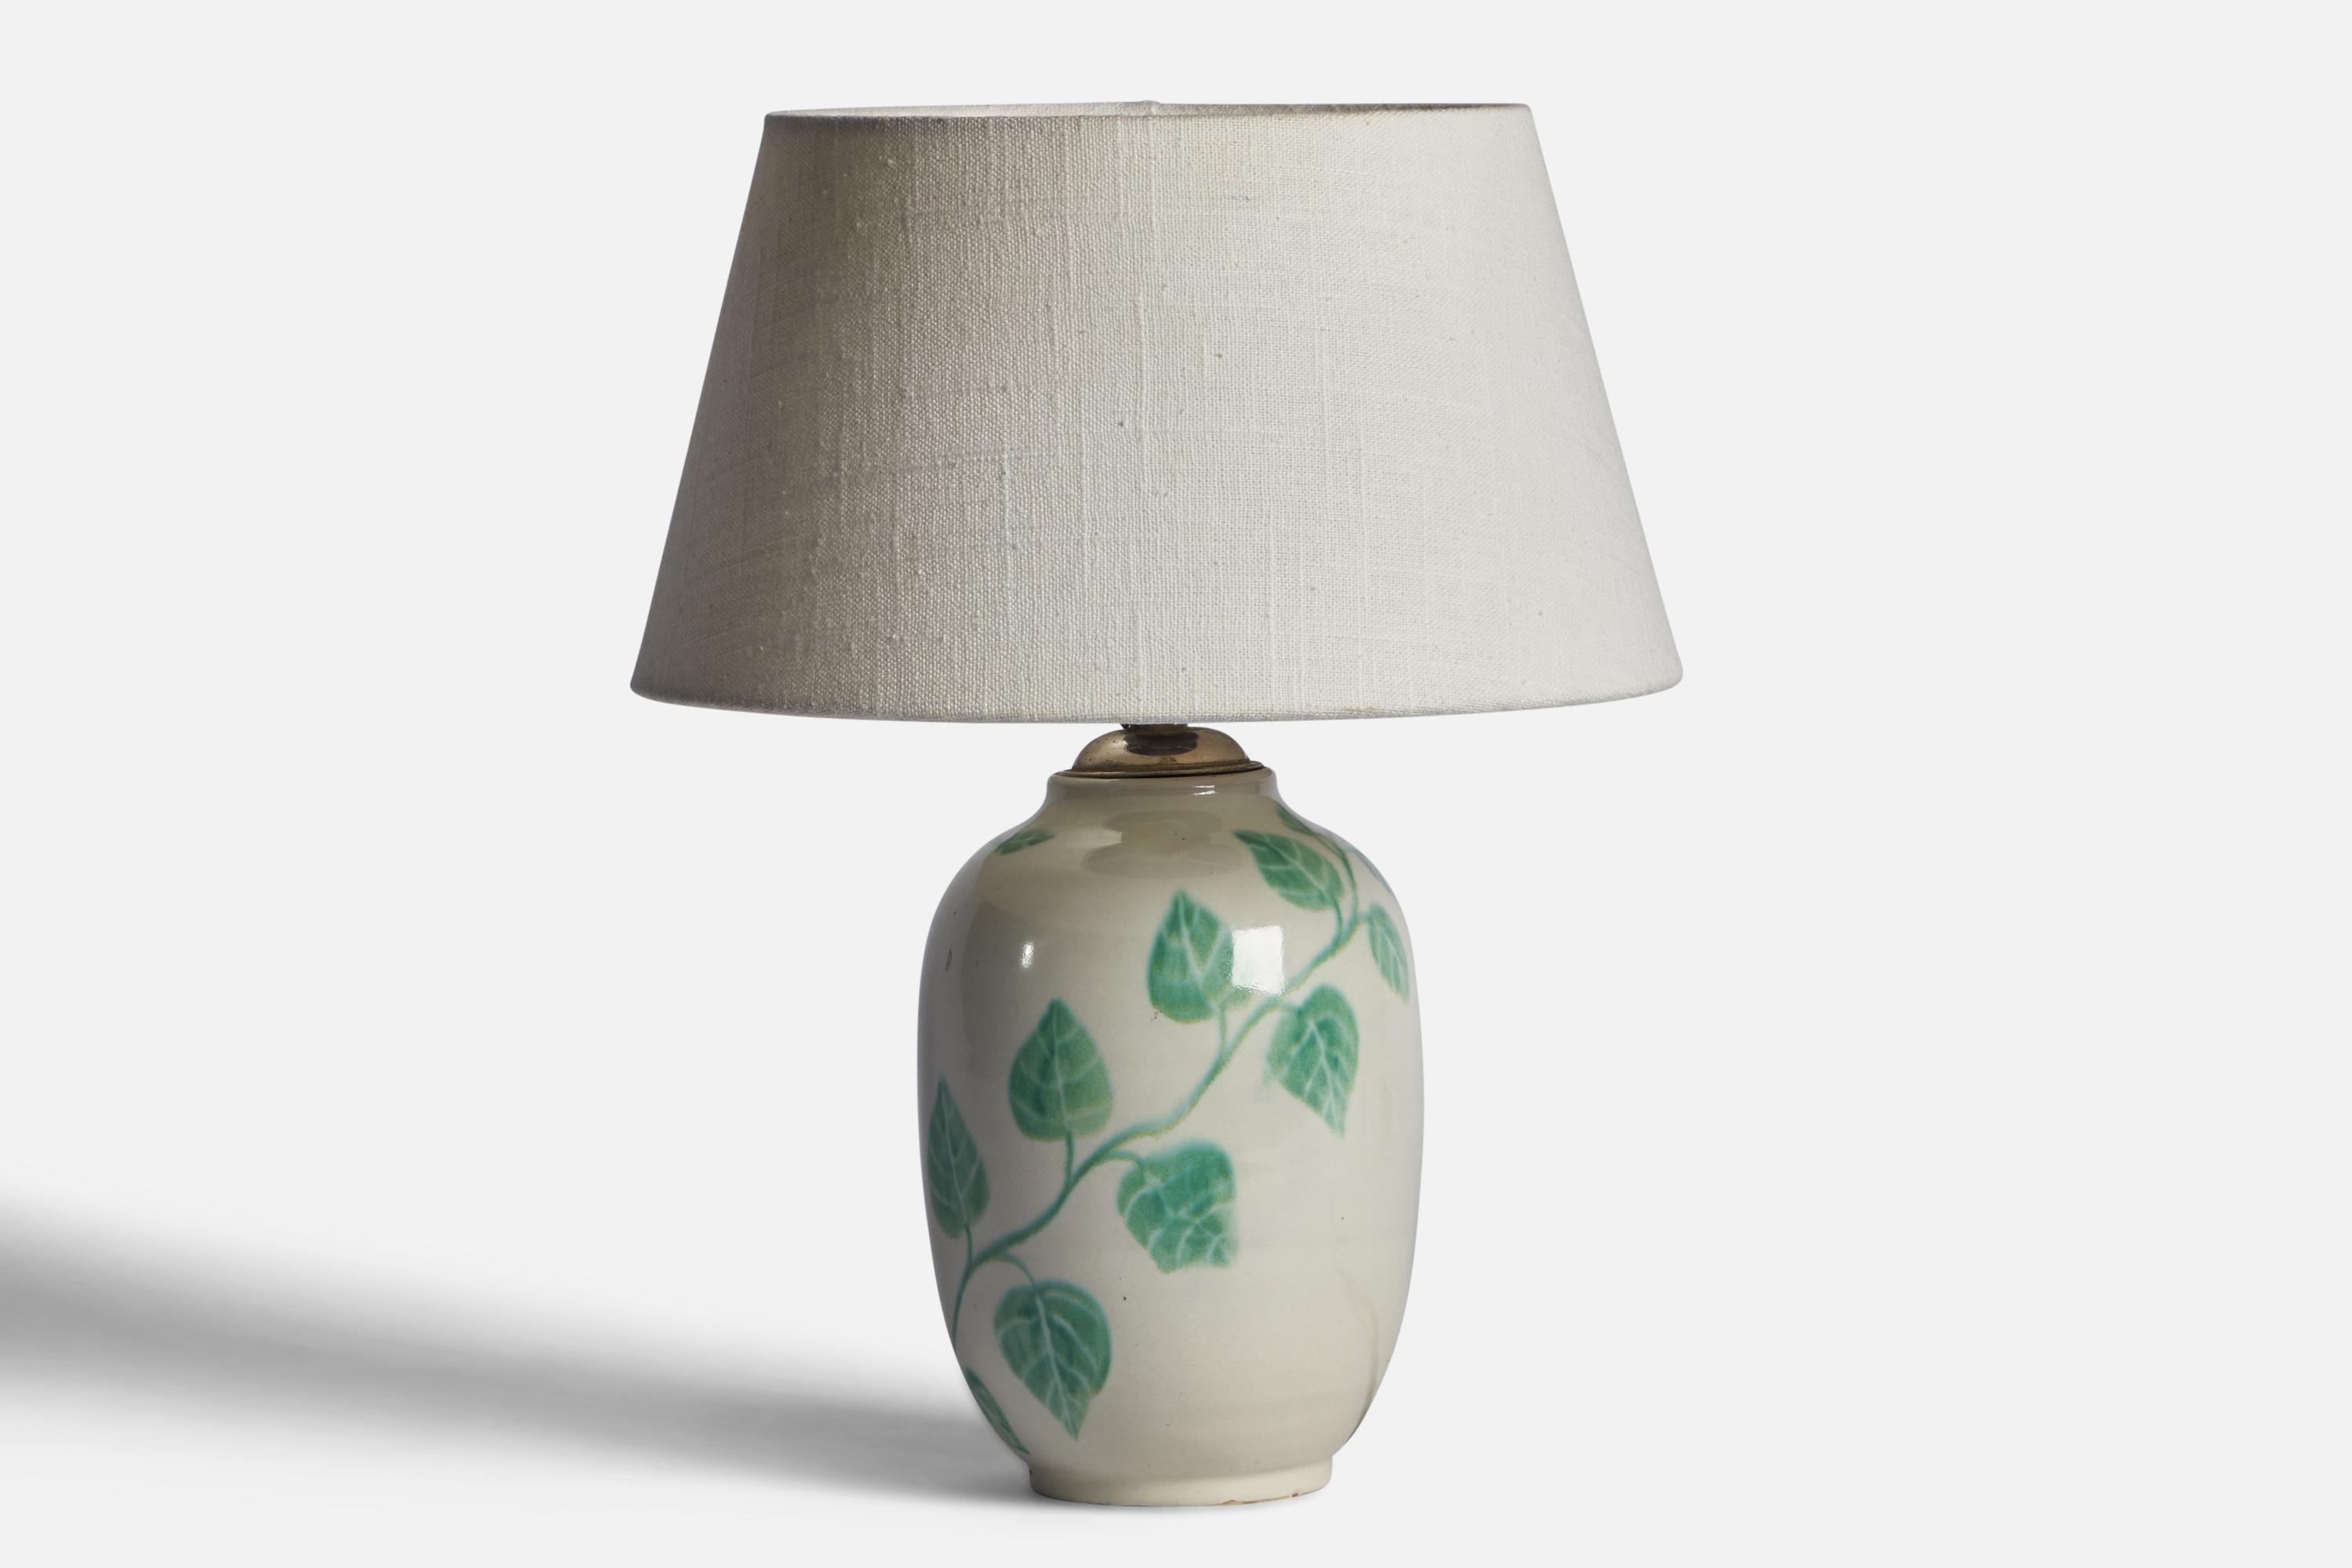 A hand-painted green and white-glazed earthenware table lamp designed and produced by Upsala Ekeby, Sweden, 1930s.

Dimensions of Lamp (inches): 10” H x 4.60” Diameter
Dimensions of Shade (inches): 7” Top Diameter x 10” Bottom Diameter x